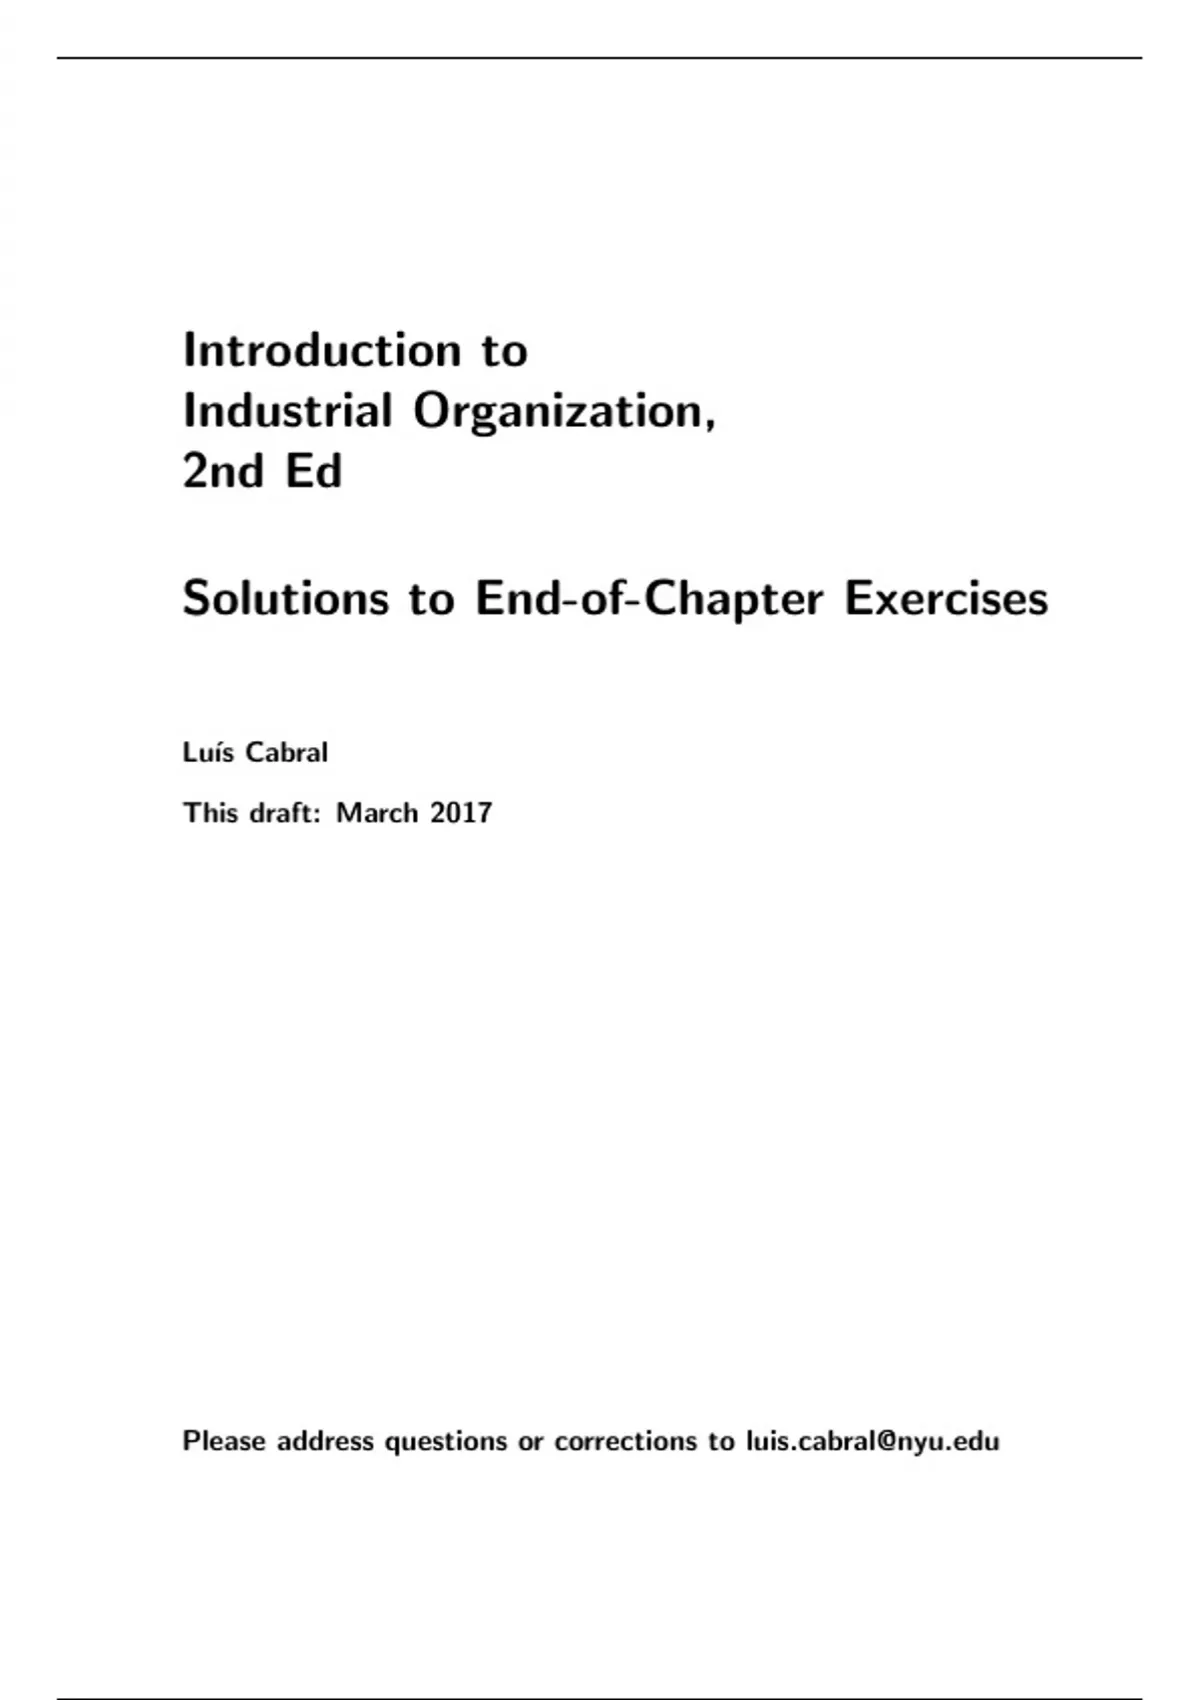 Introduction to Industrial Organization, 2nd Ed Solutions to